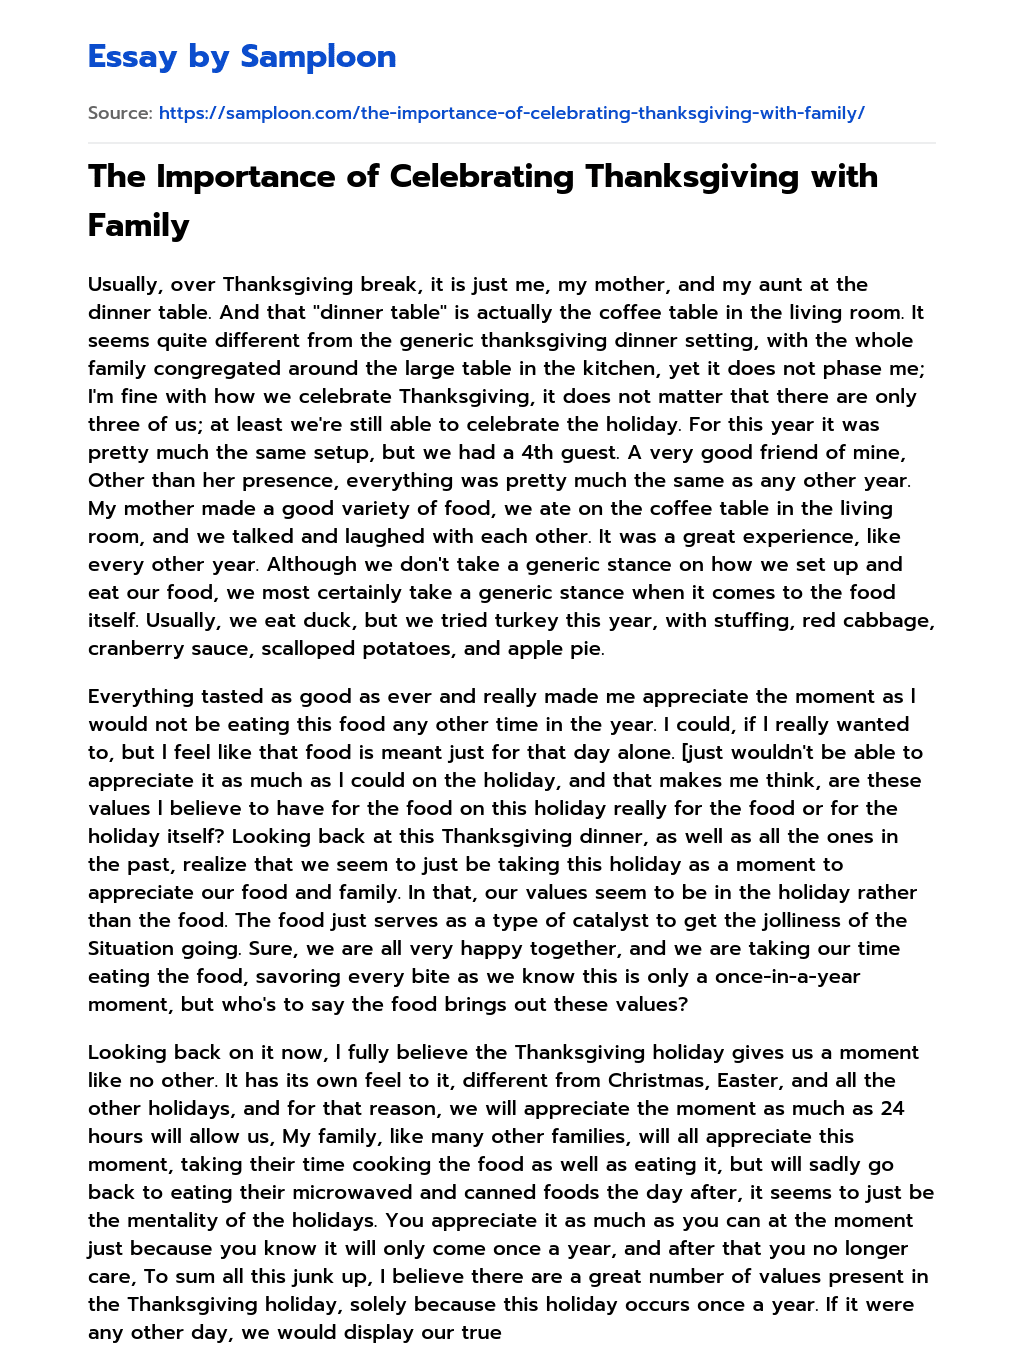 The Importance of Celebrating Thanksgiving with Family essay